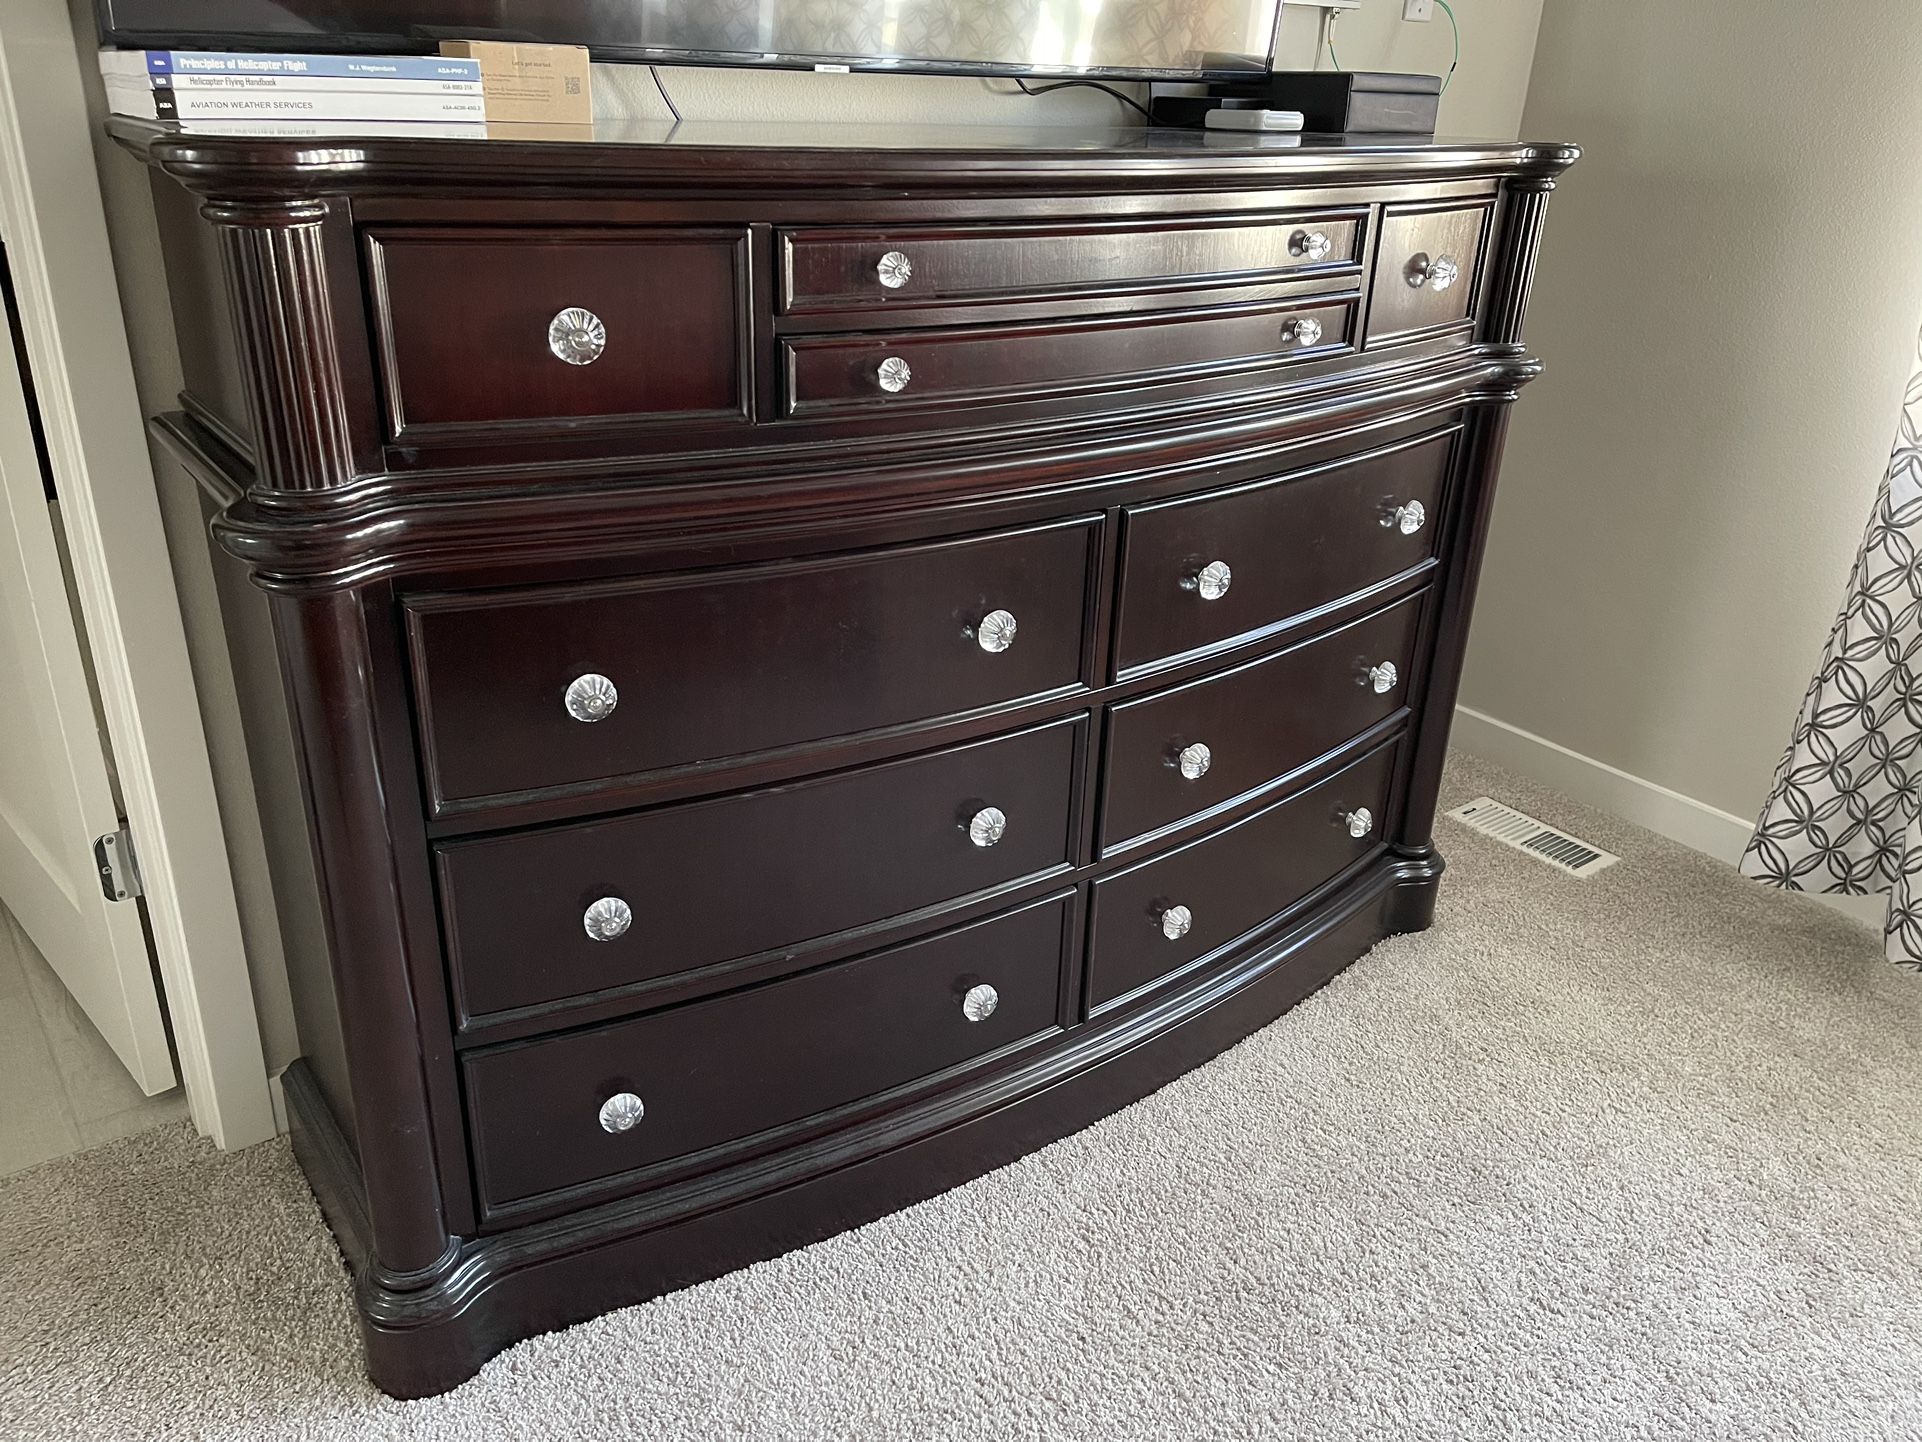 Six Drawer Dresser With Topper